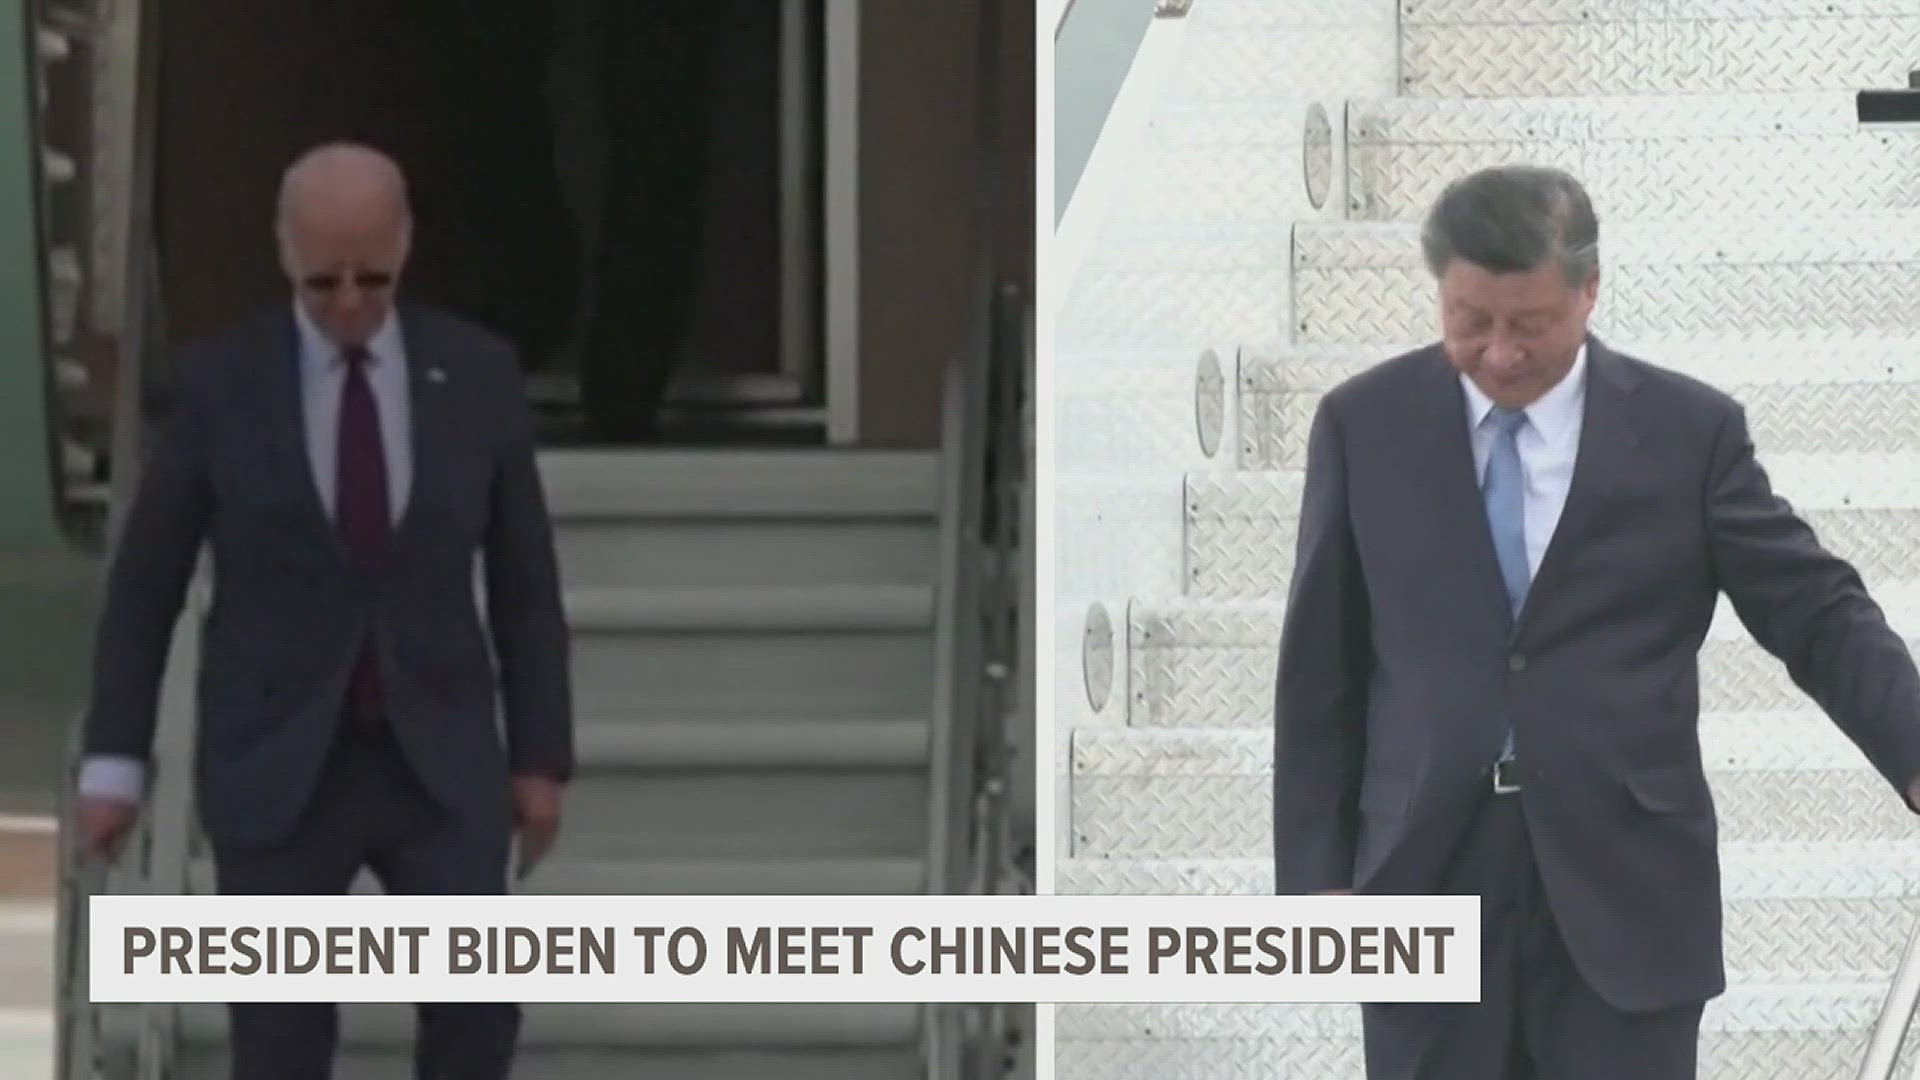 This week President Biden and President Xi Ping will meet in San Francisco for the annual Asia-Pacific Economic Cooperation Summit.